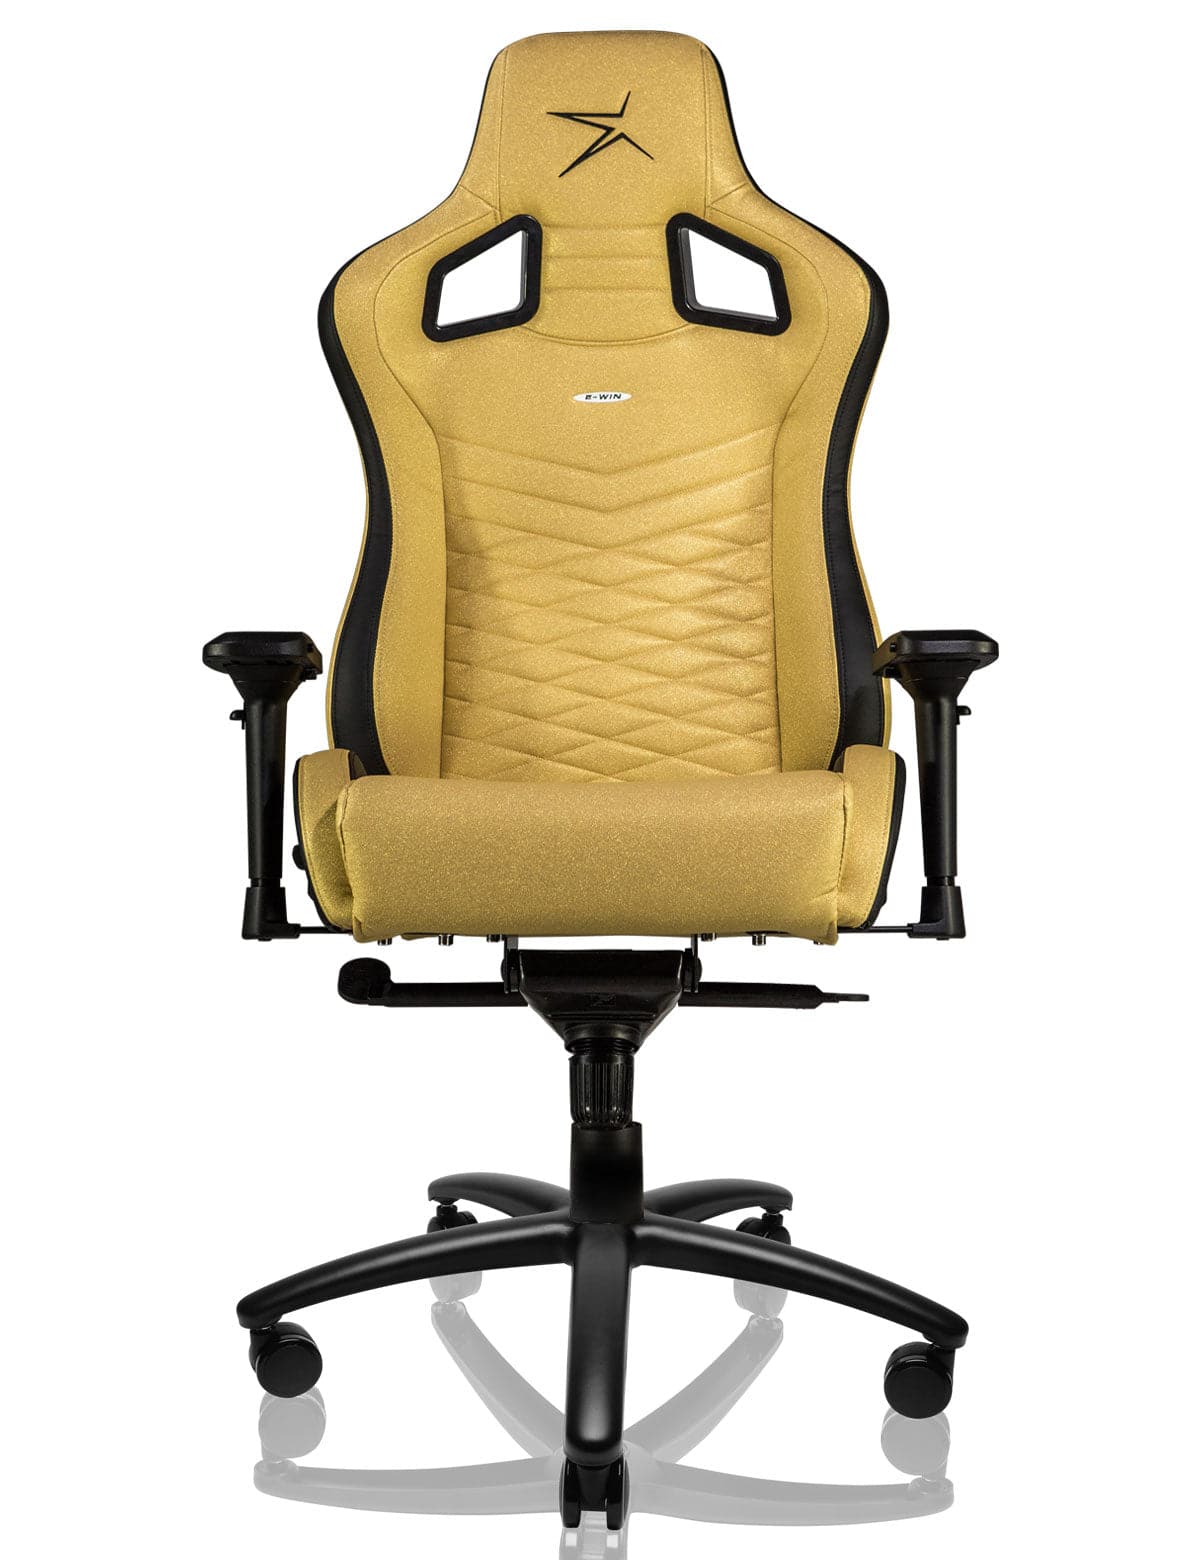 E-WIN Flash XL Size Classic Series Ergonomic Golden Computer Gaming Office Chair with Pillows - FLI-XL-Classic